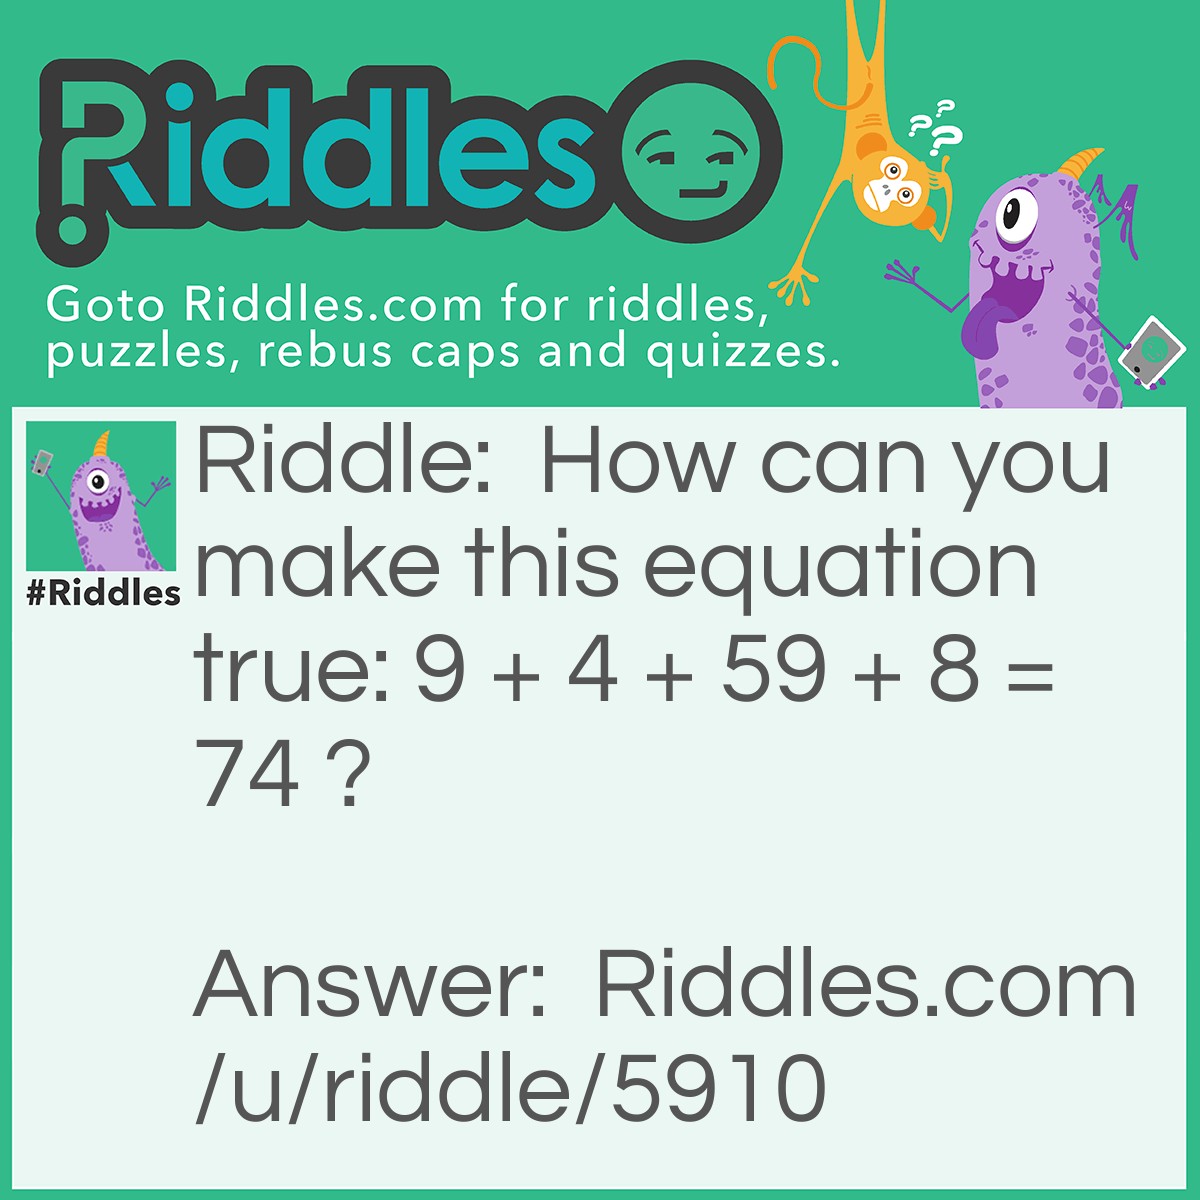 Riddle: How can you make this equation true: 9 + 4 + 59 + 8 = 74 ? Answer: Turn the 9's upside down to get 6 i.e 6 + 4 + 56 + 8 = 74.